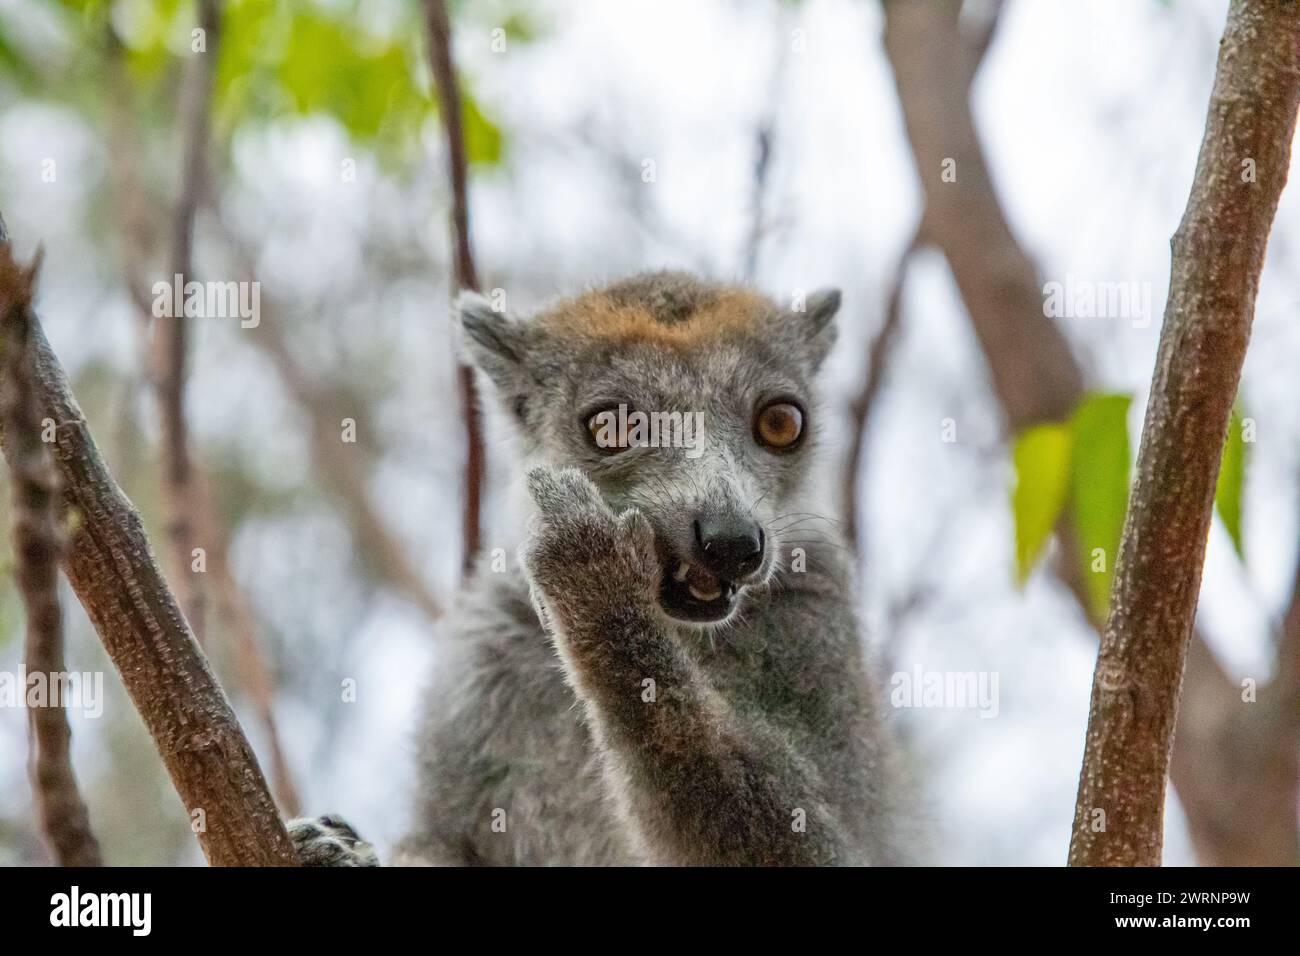 Eulemur coronatus, Crowned Lemur, graces Madagascar's forests with its regal presence. arboreal primate, with its distinctive crown, adds touch of roy Stock Photo